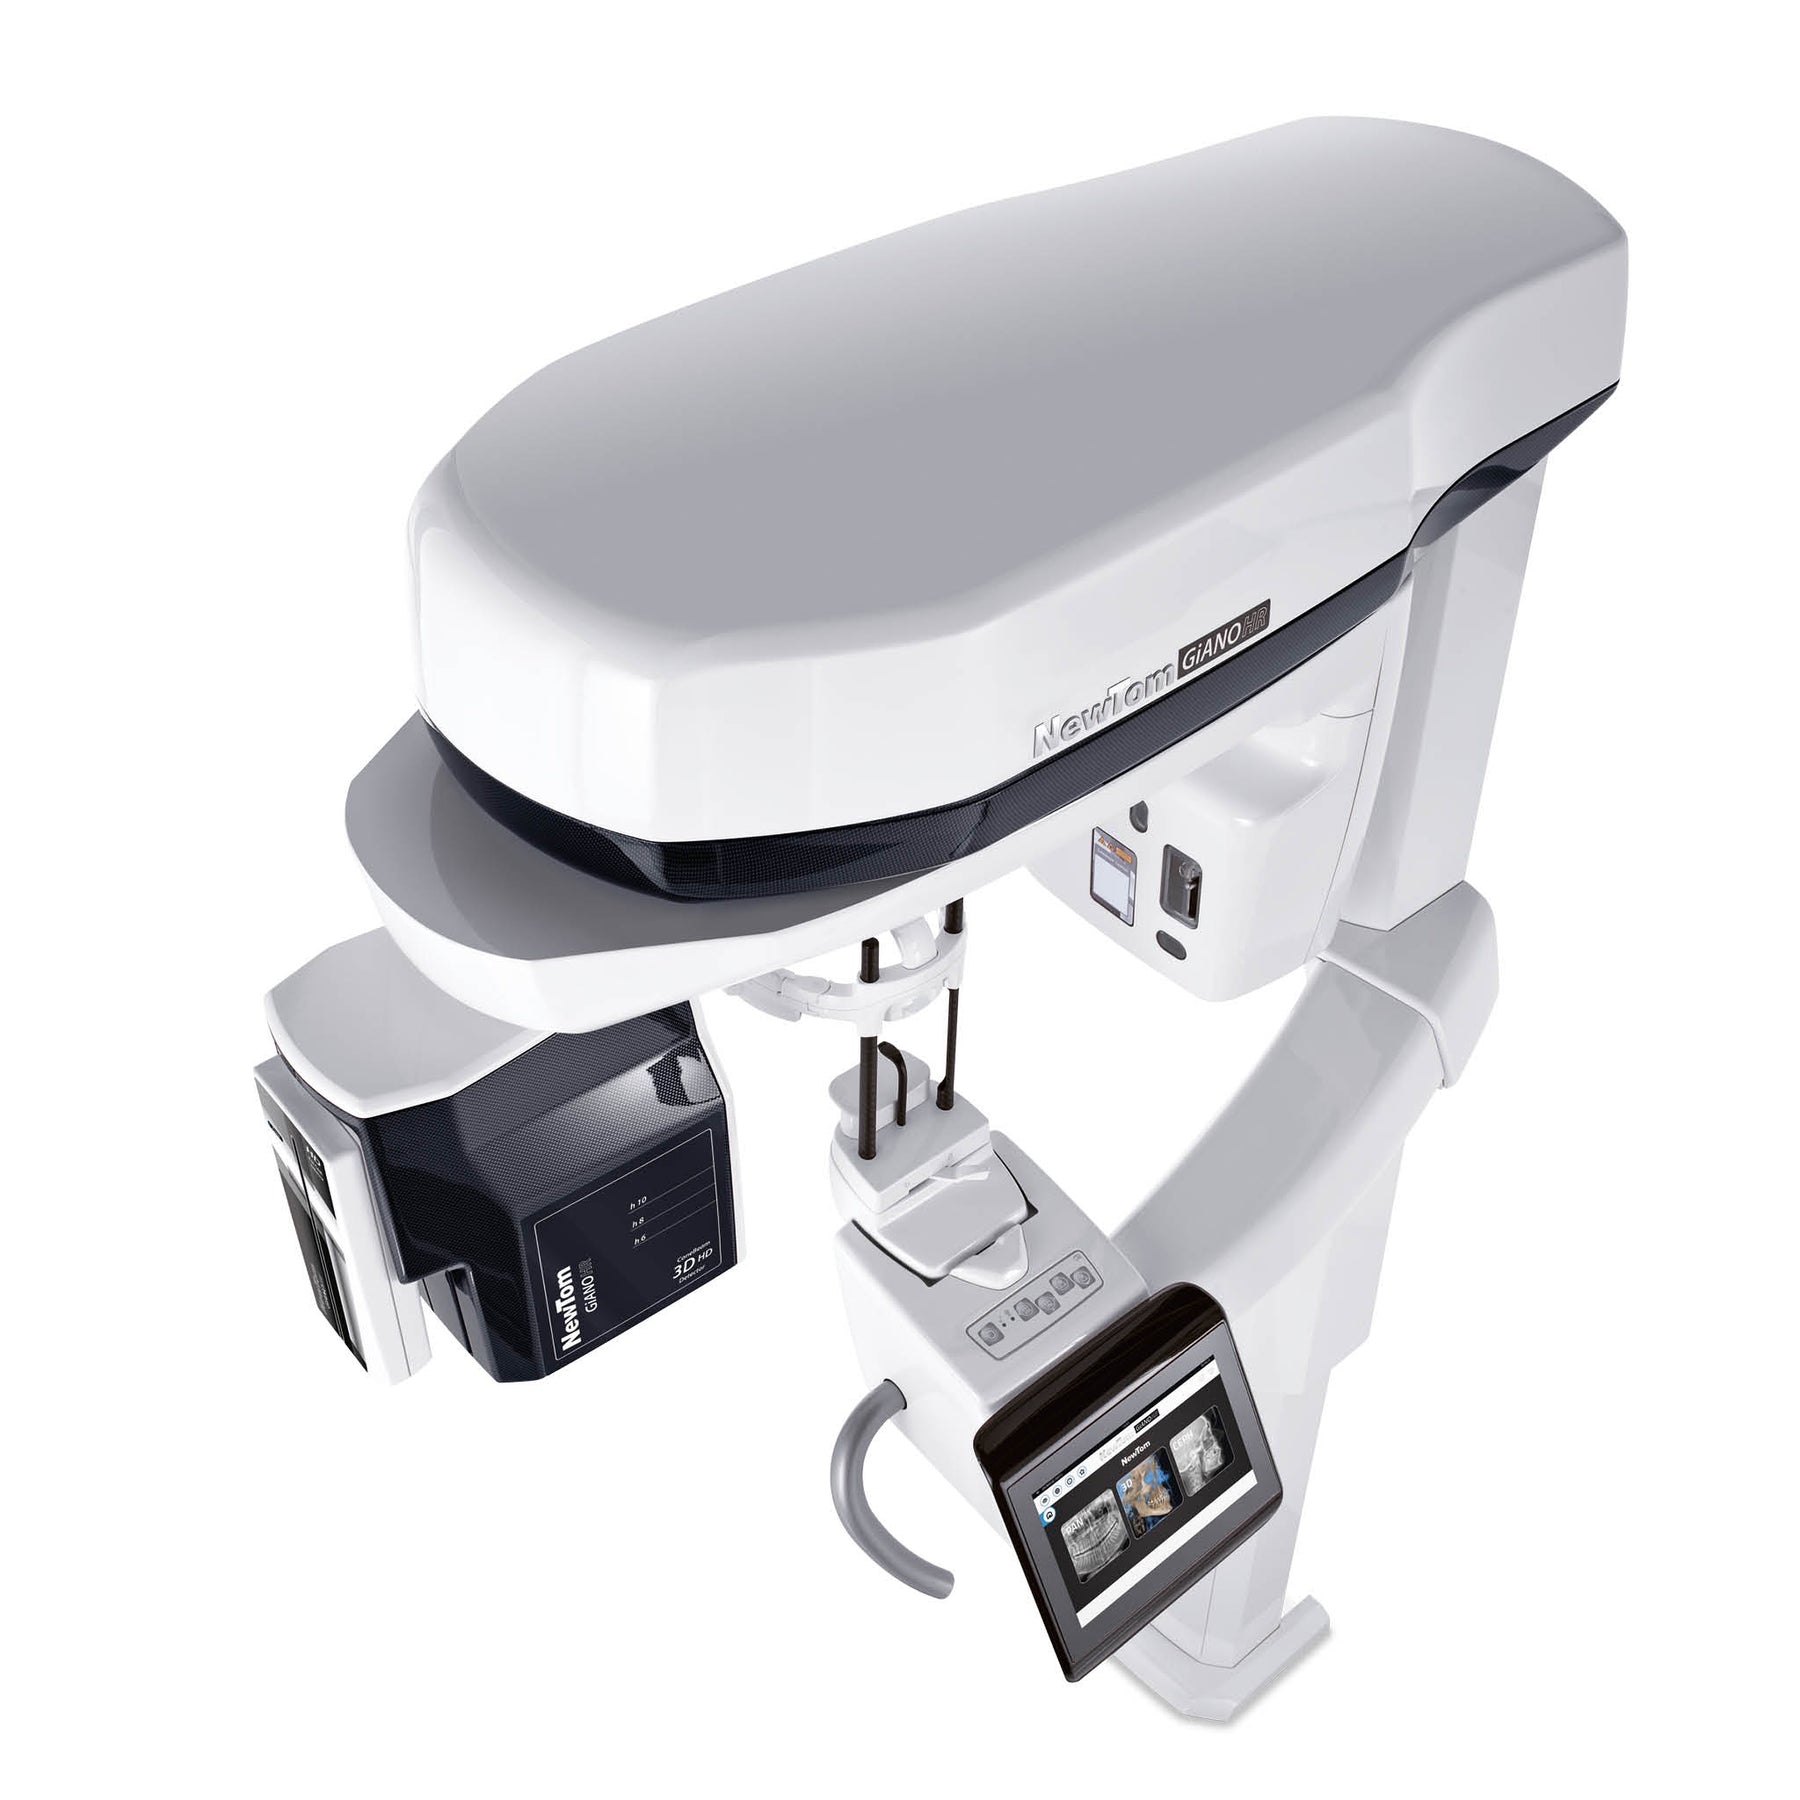 The GiANO HR is the complete hybrid CBCT for 2D/3D imaging, top view.